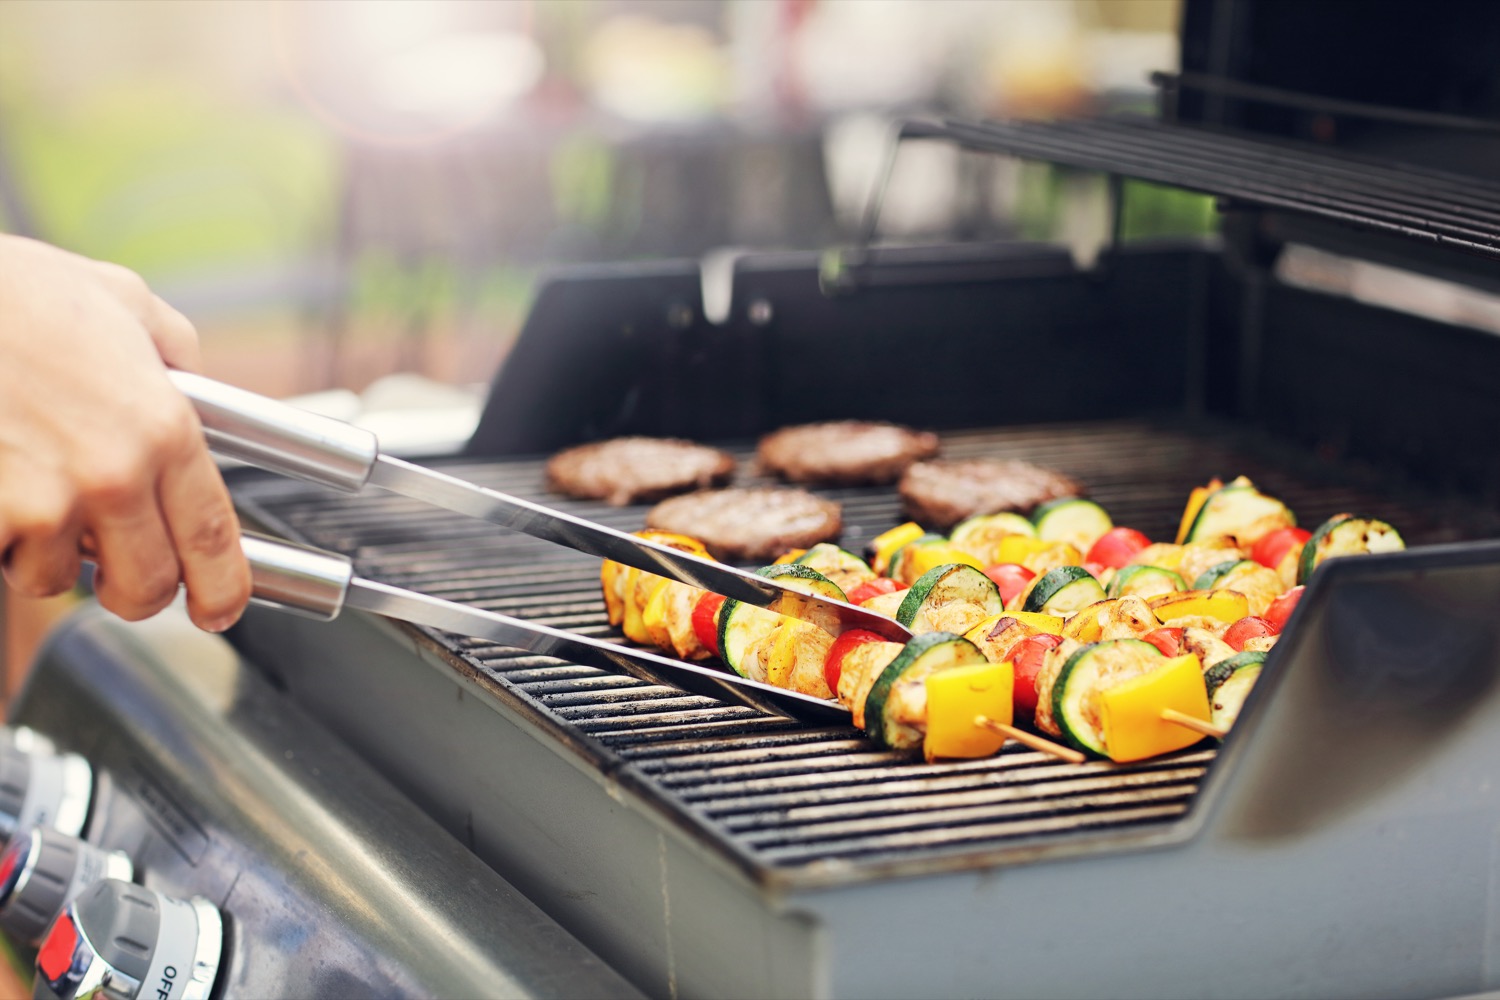 Barbequing vegetable kabobs and burgers on a propane grill. 